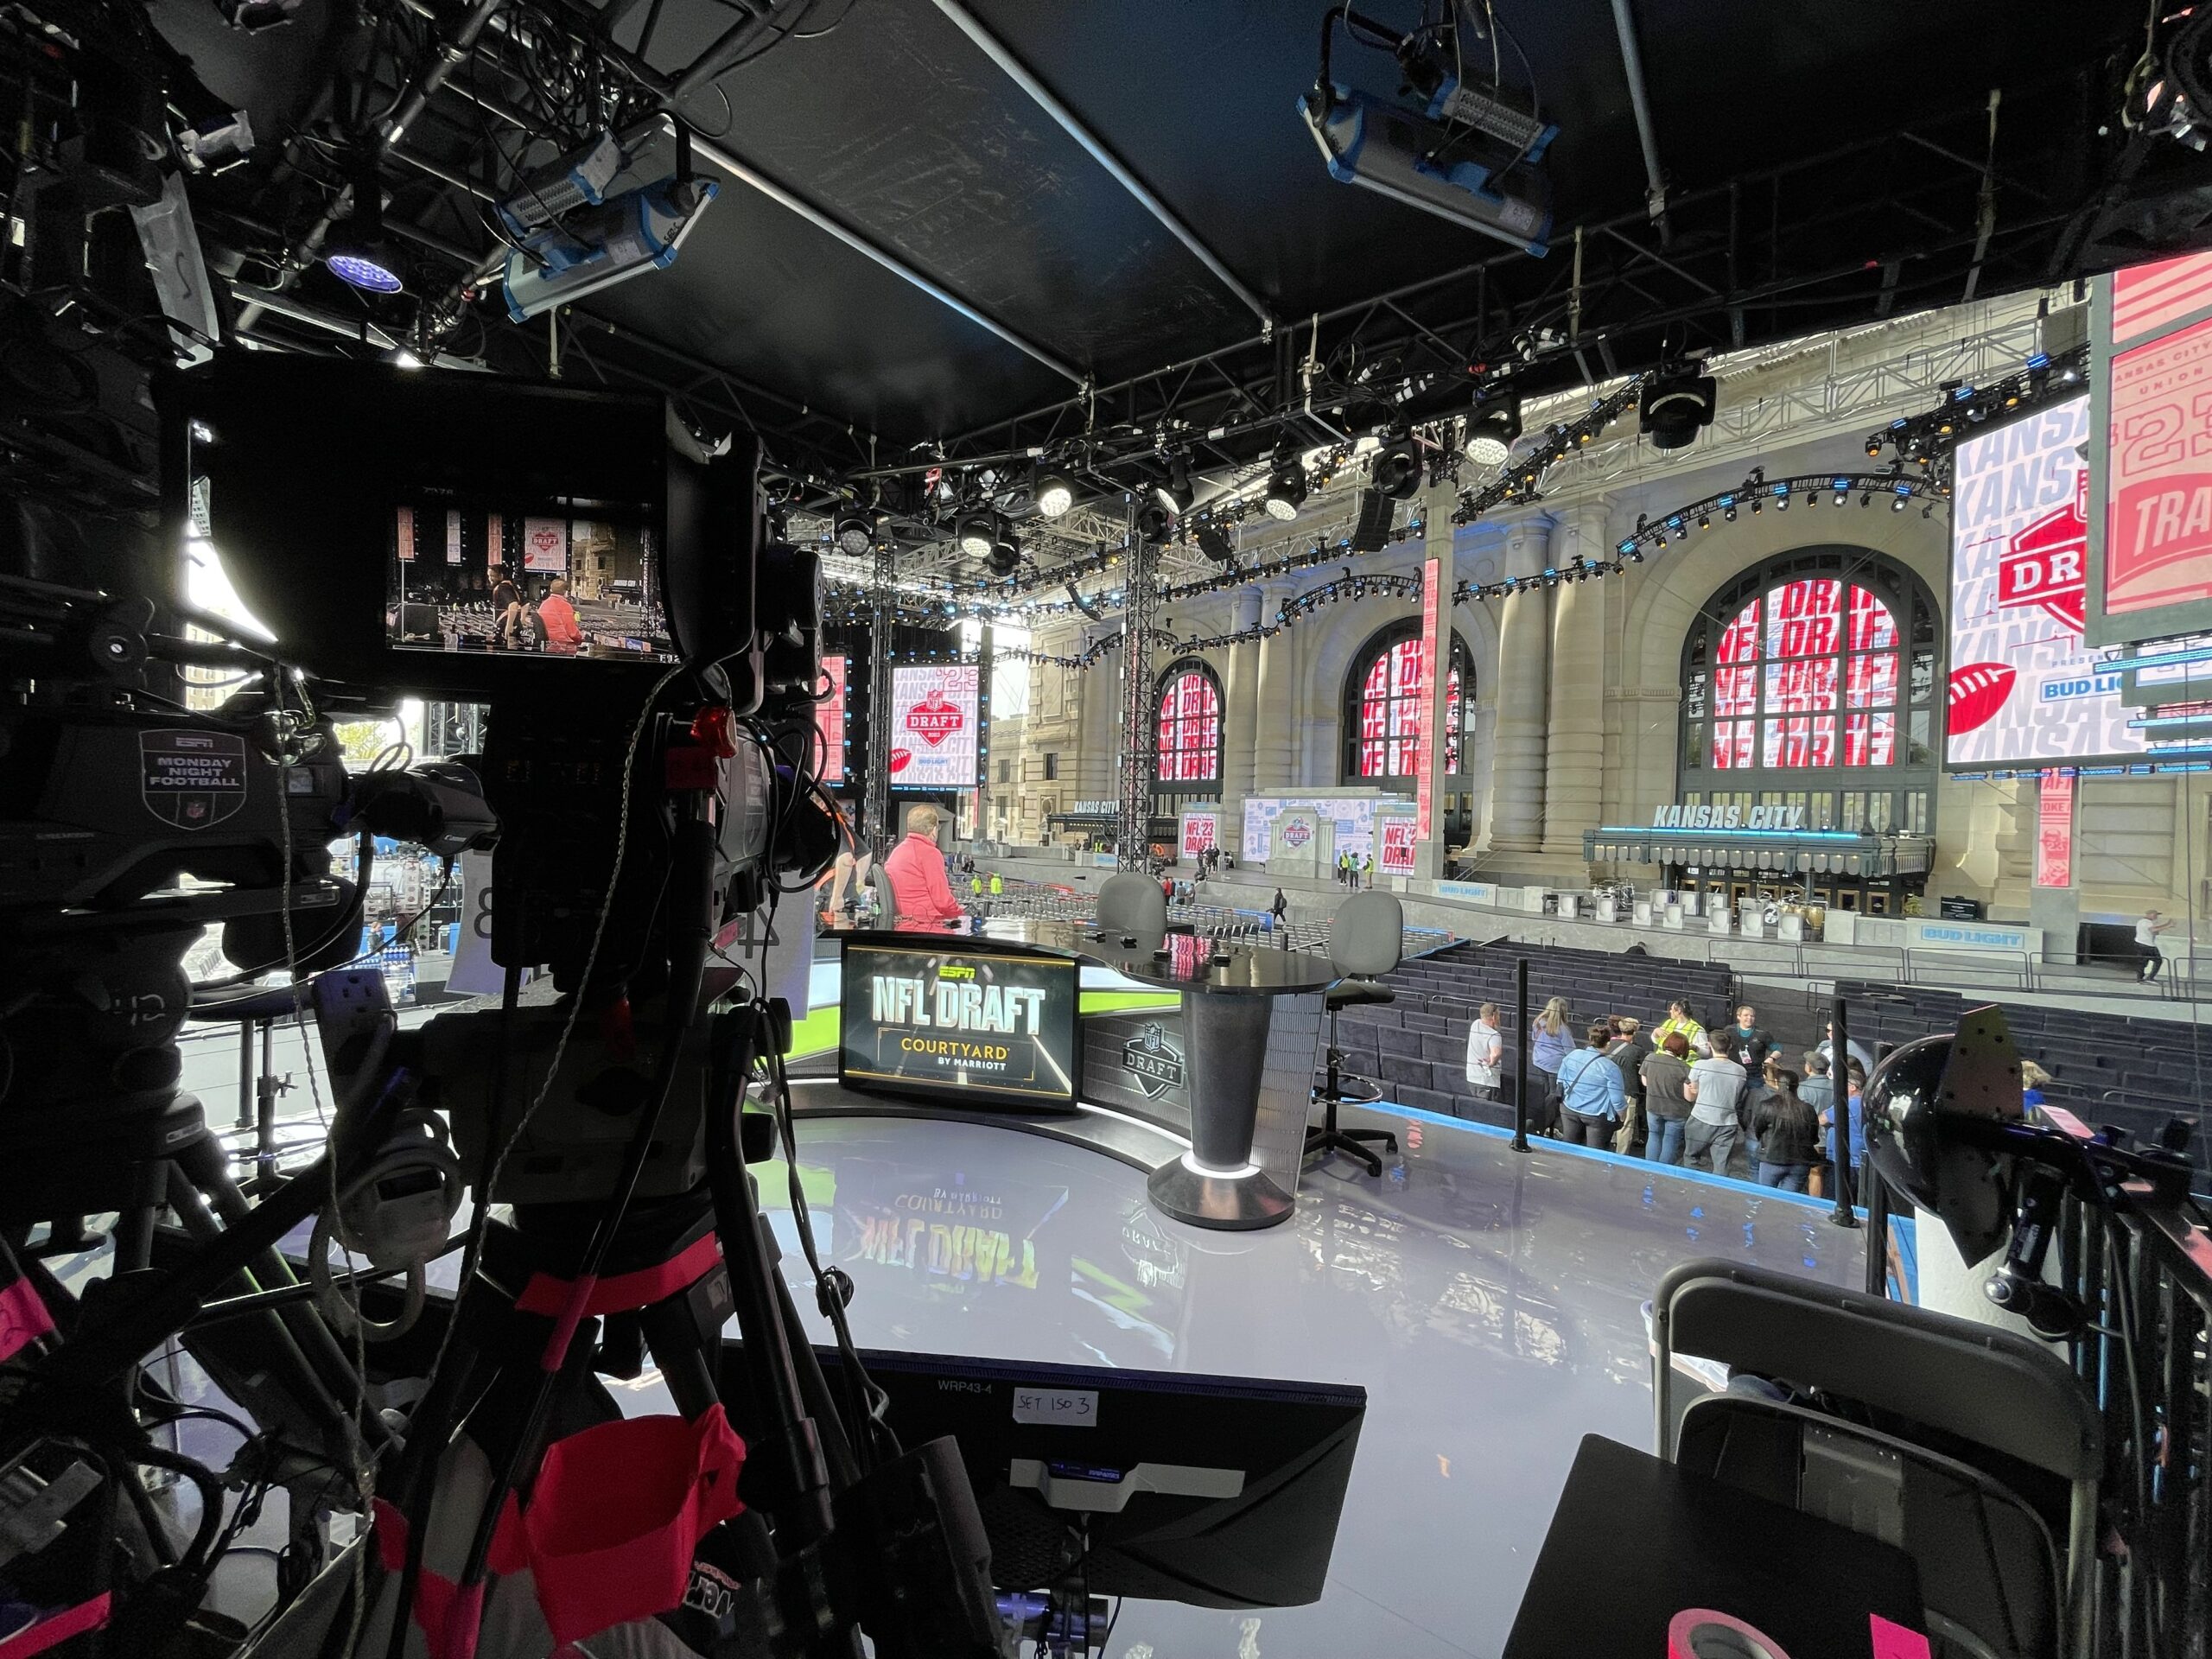 Live From NFL Draft 2023: Multiple Jibs, RF Cameras, AR Graphics